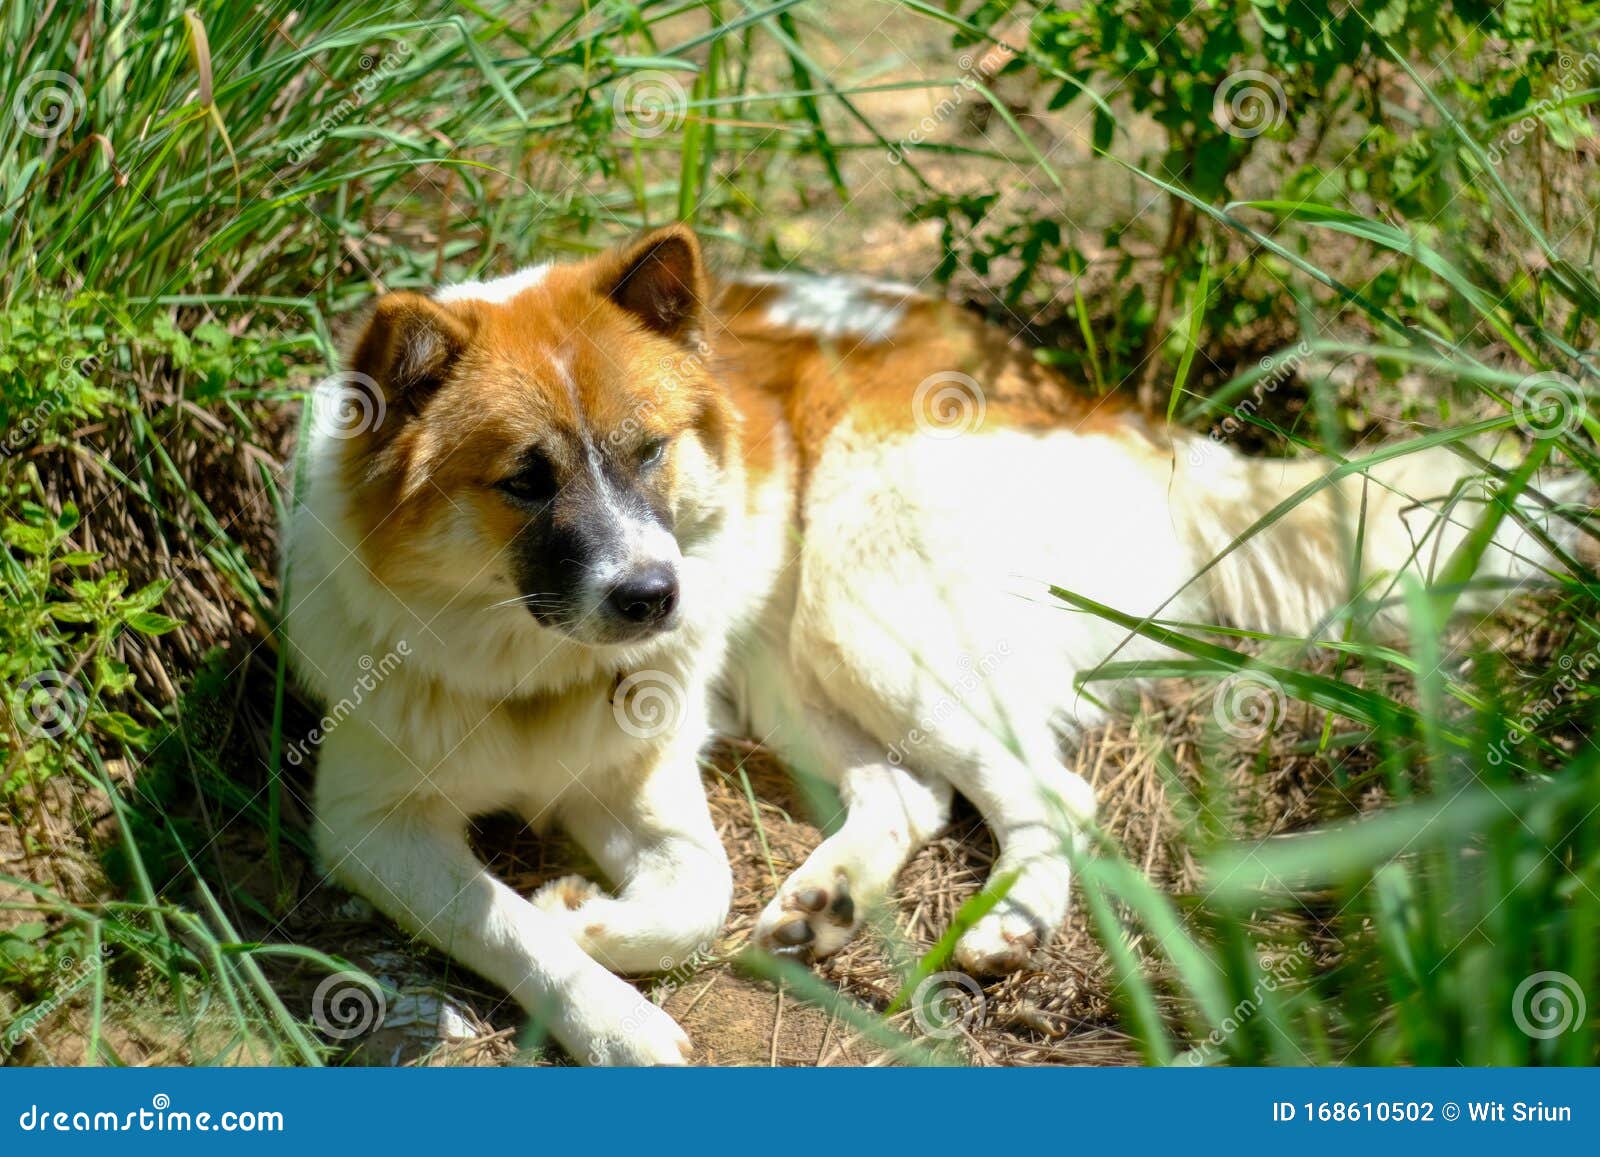 Thai Bangkaew Dog Brown And White Color Resting In Garden Stock Photo Image Of Resting Garden 168610502